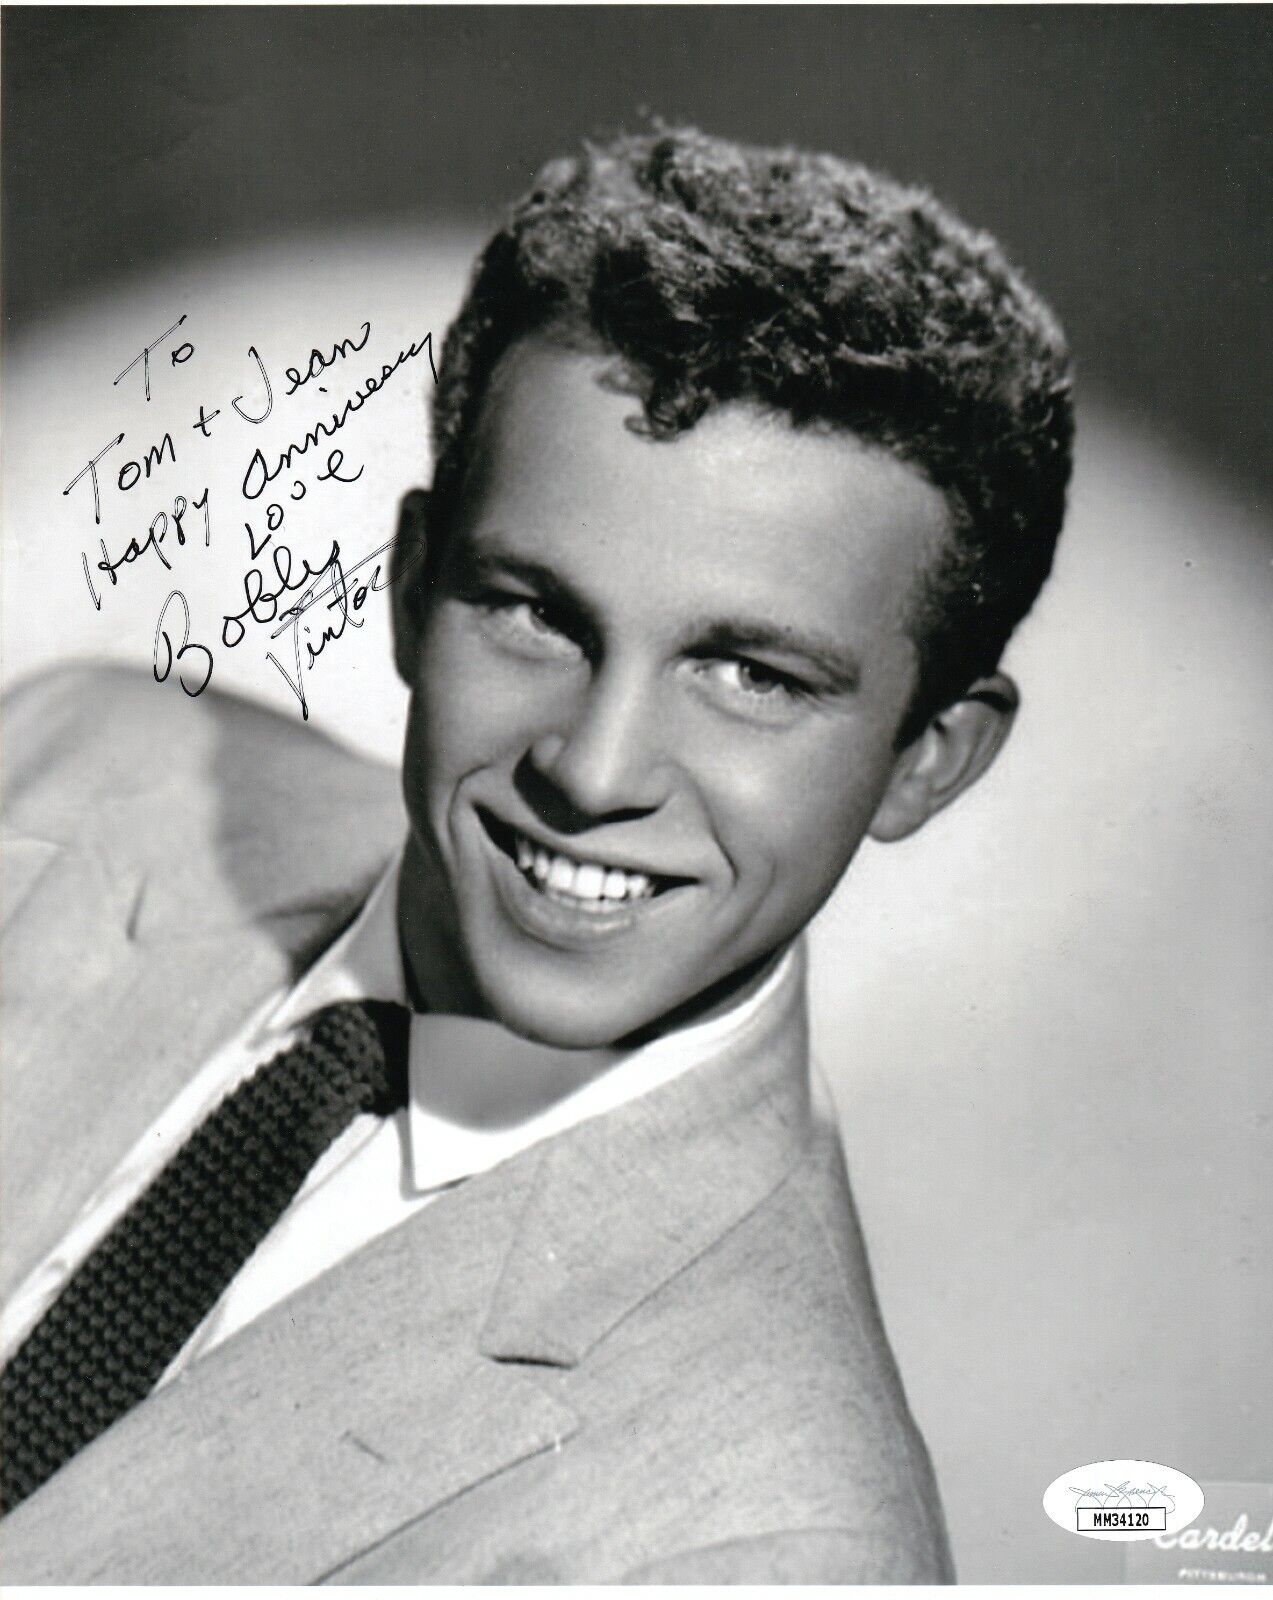 Bobby Vinton singer REAL hand SIGNED Photo Poster painting #2 JSA COA Autographed Music